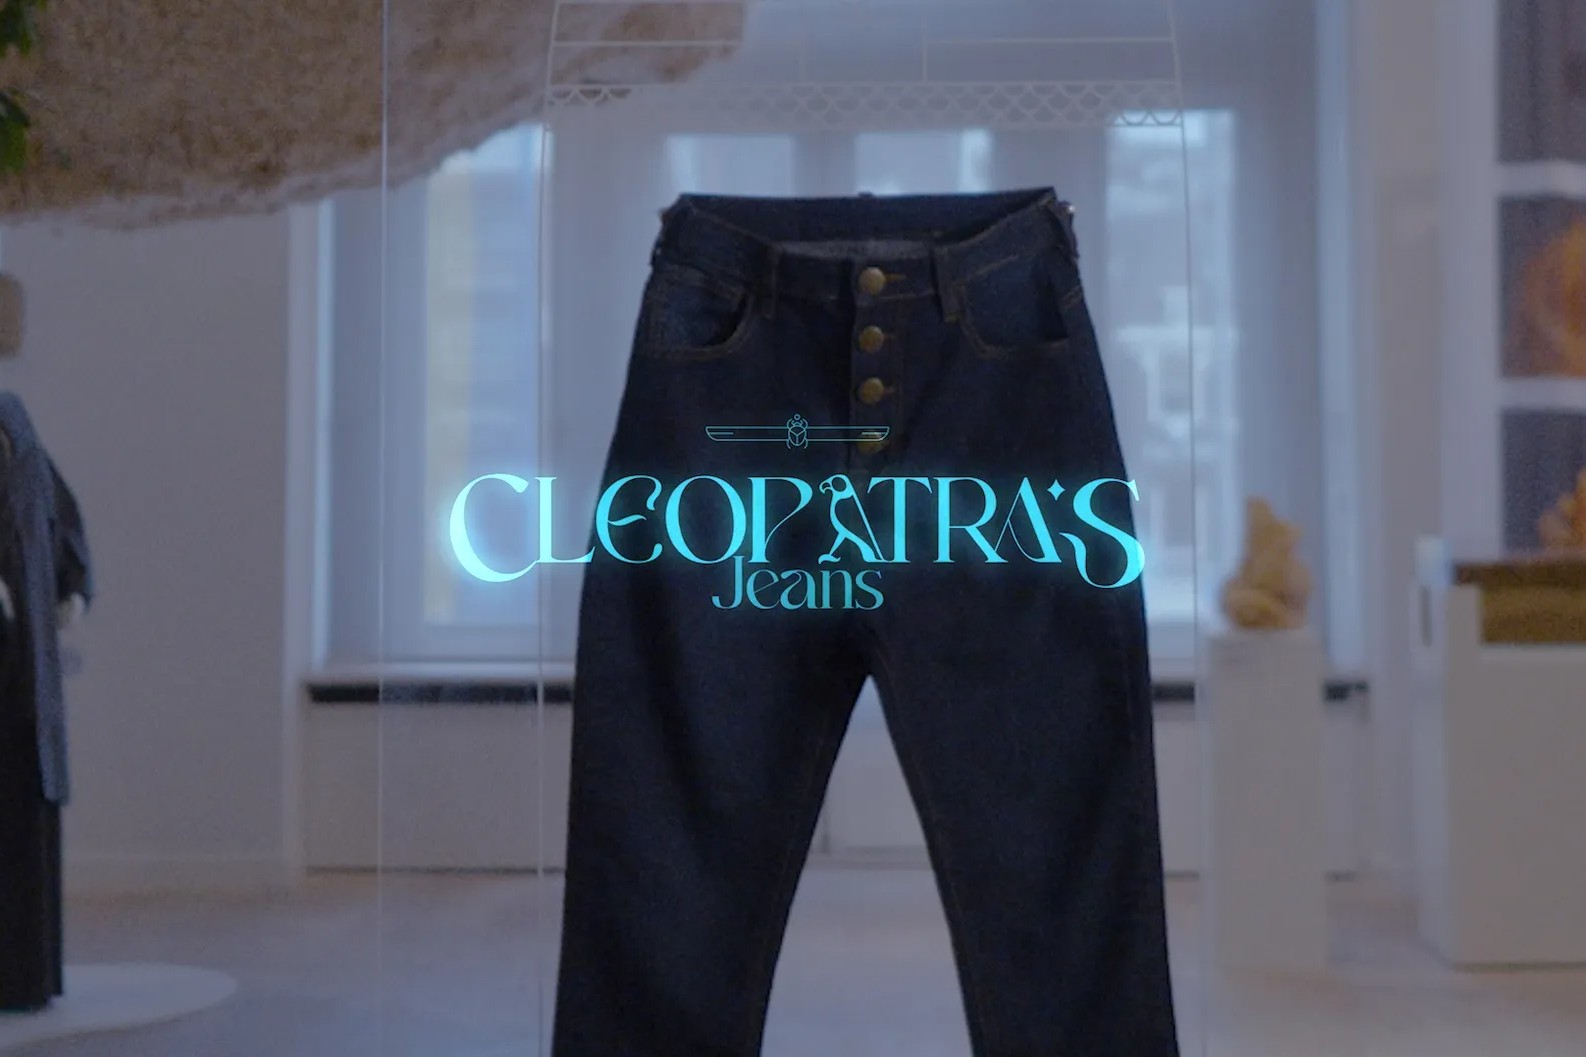 Cleopatra Jeans demonstrates the call for a zero-waste future